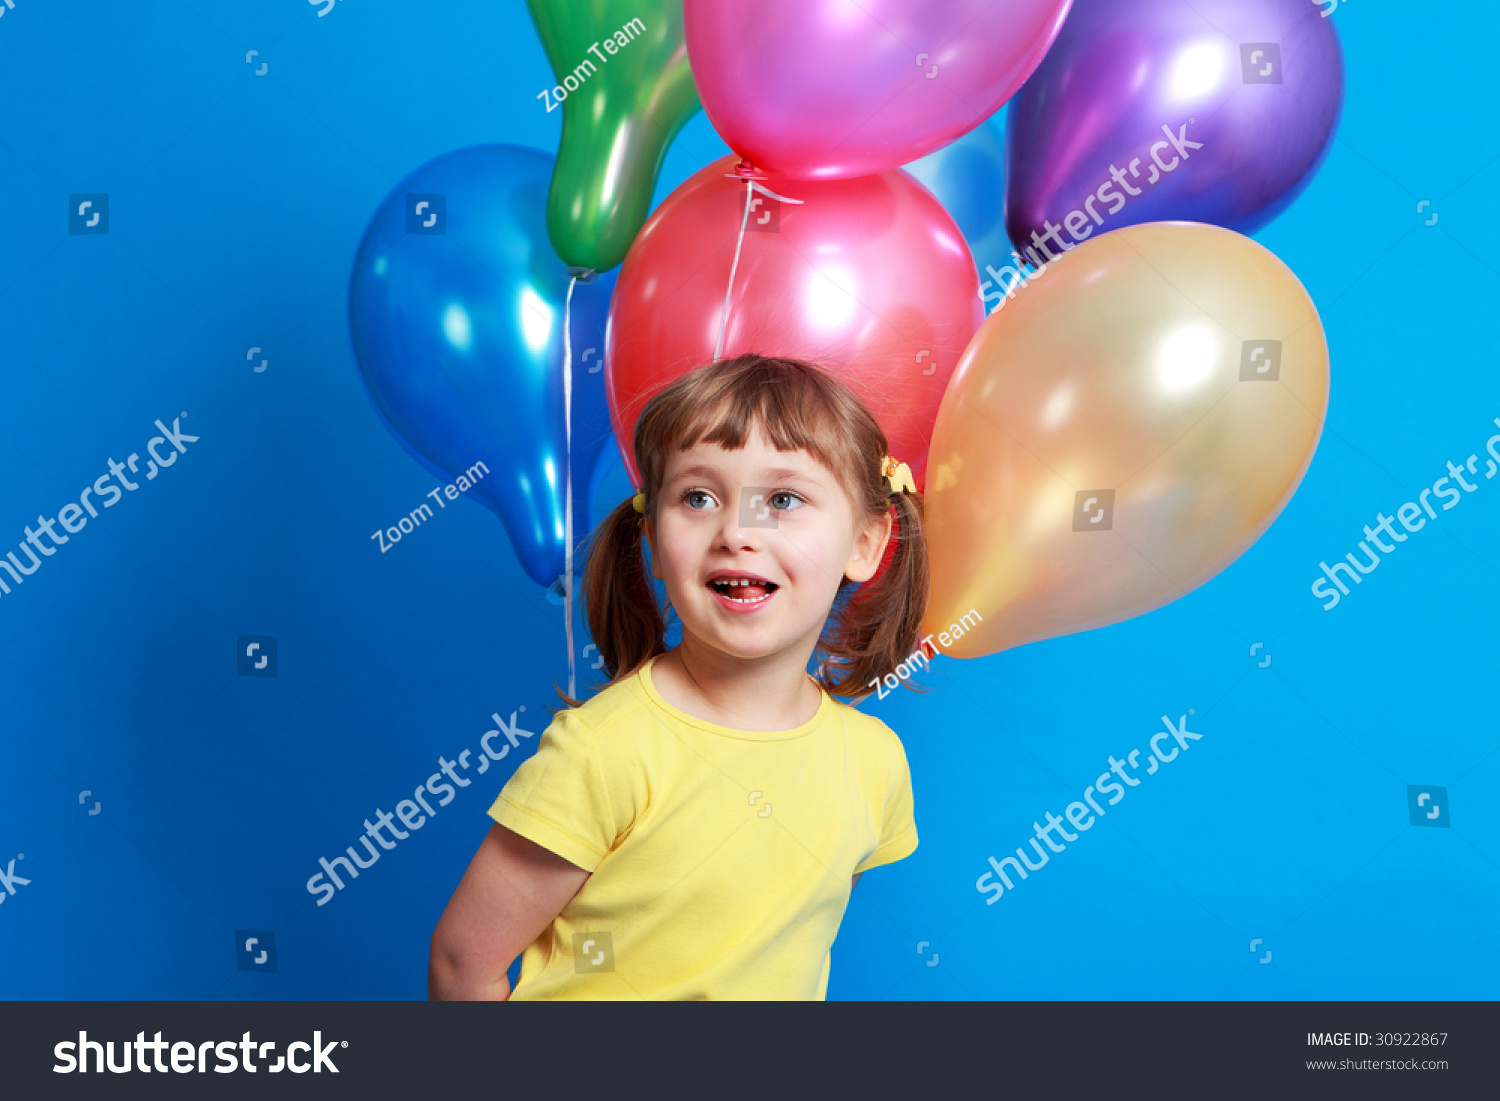 Little Girl Holding Colorful Balloons On A Blue Background Stock Photo ...